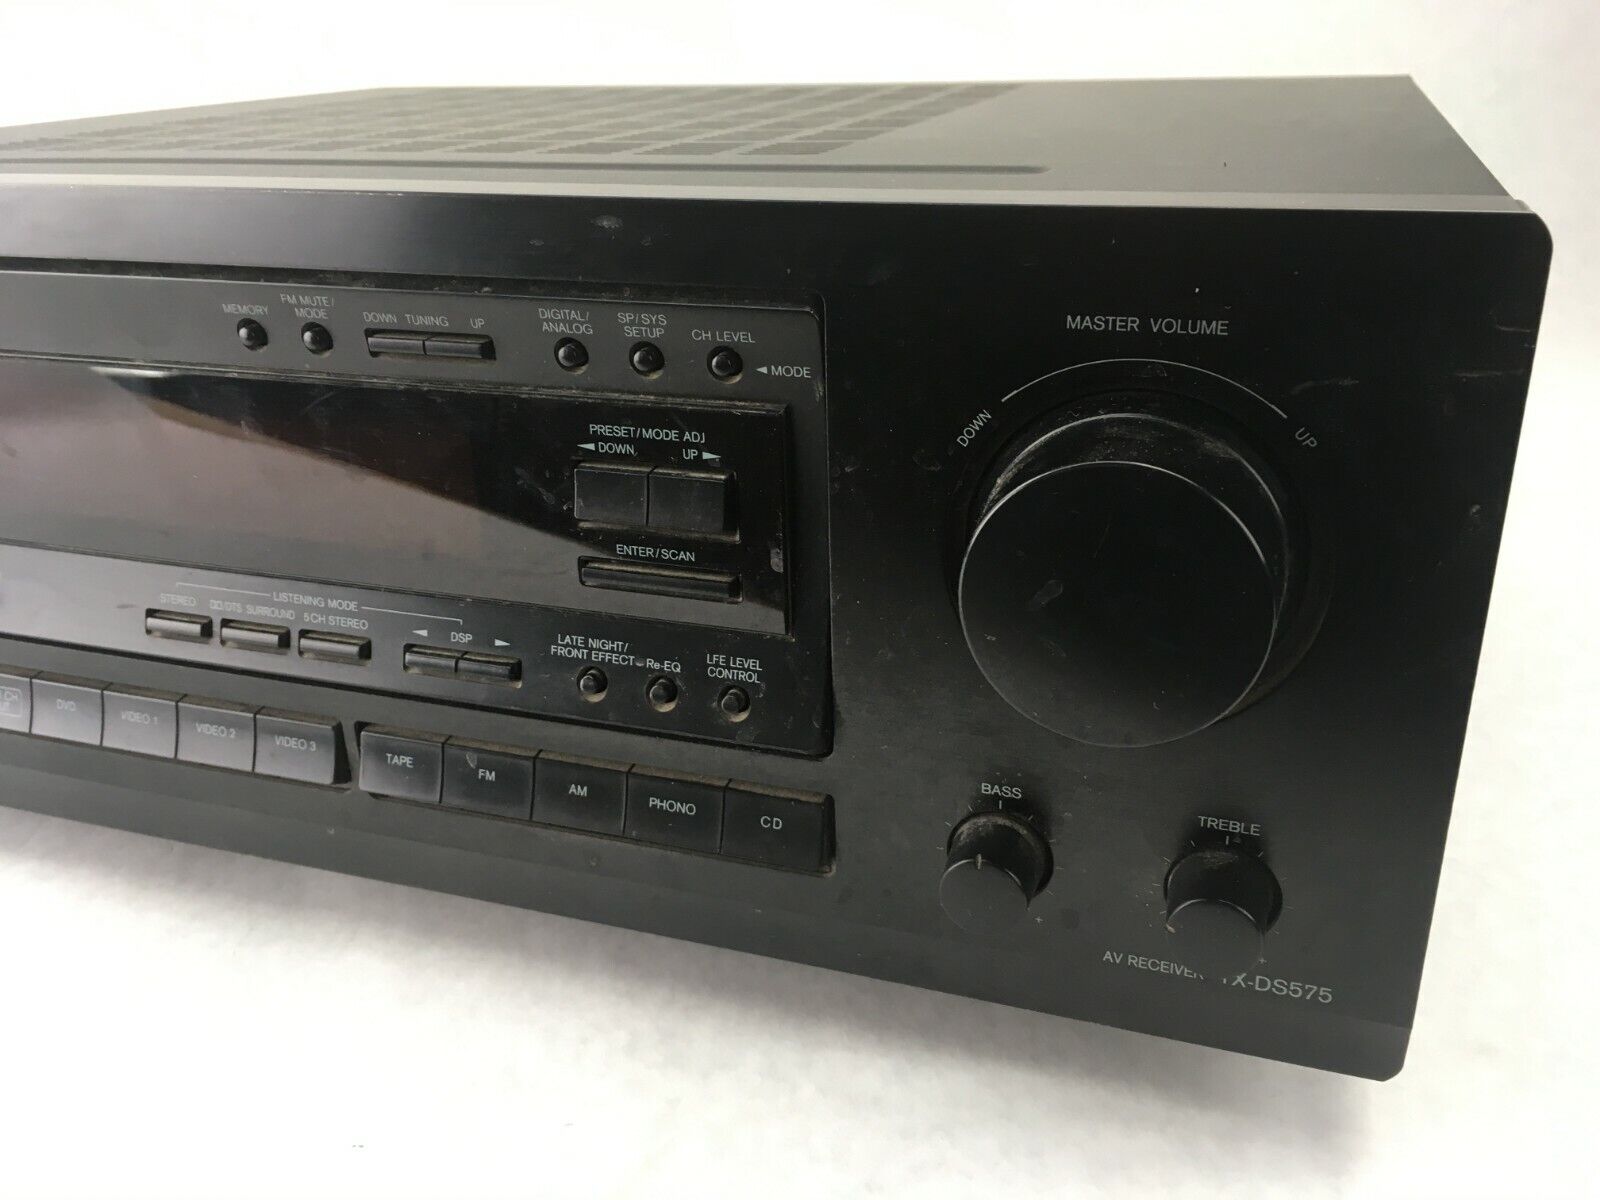 Onkyo TX-DS575X 5.1 Channel Home Theater Receiver Needs Repair - Working